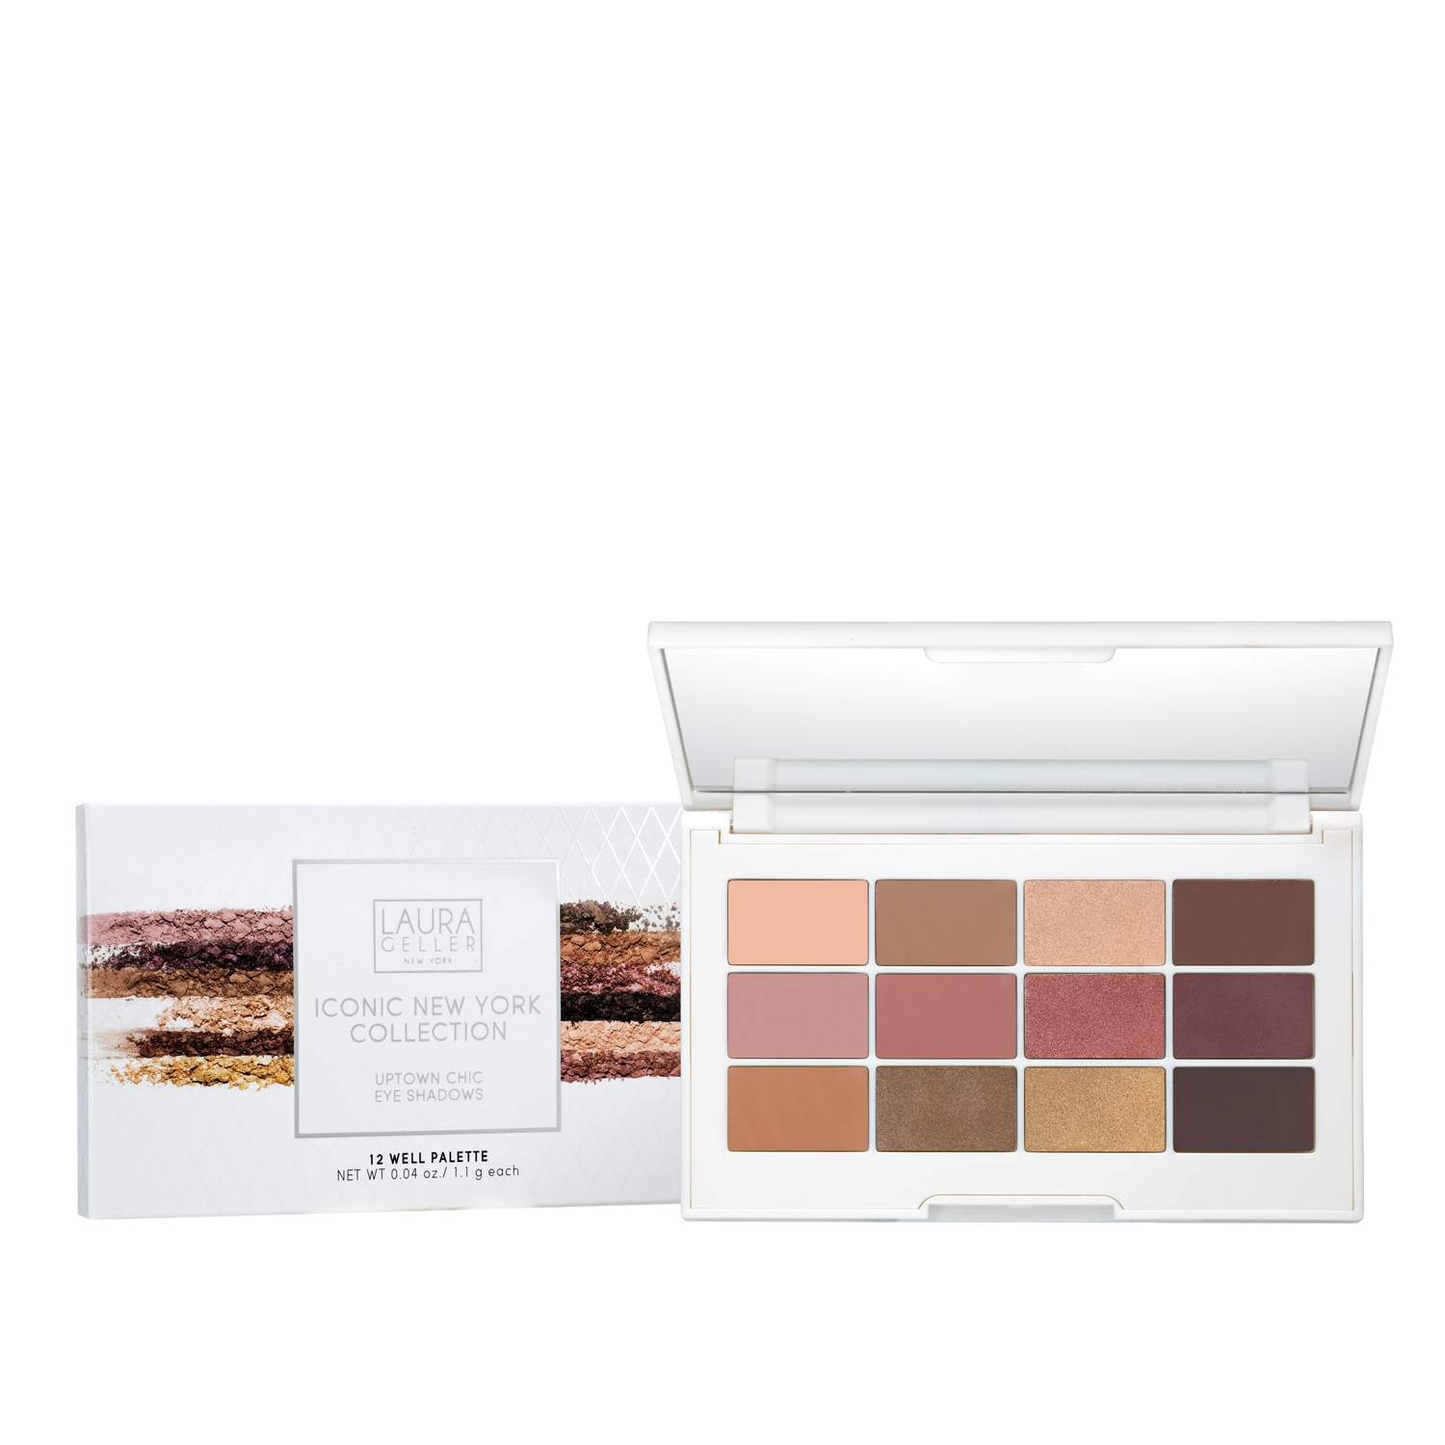 New York Iconic New York Collection Eye Shadow Palette